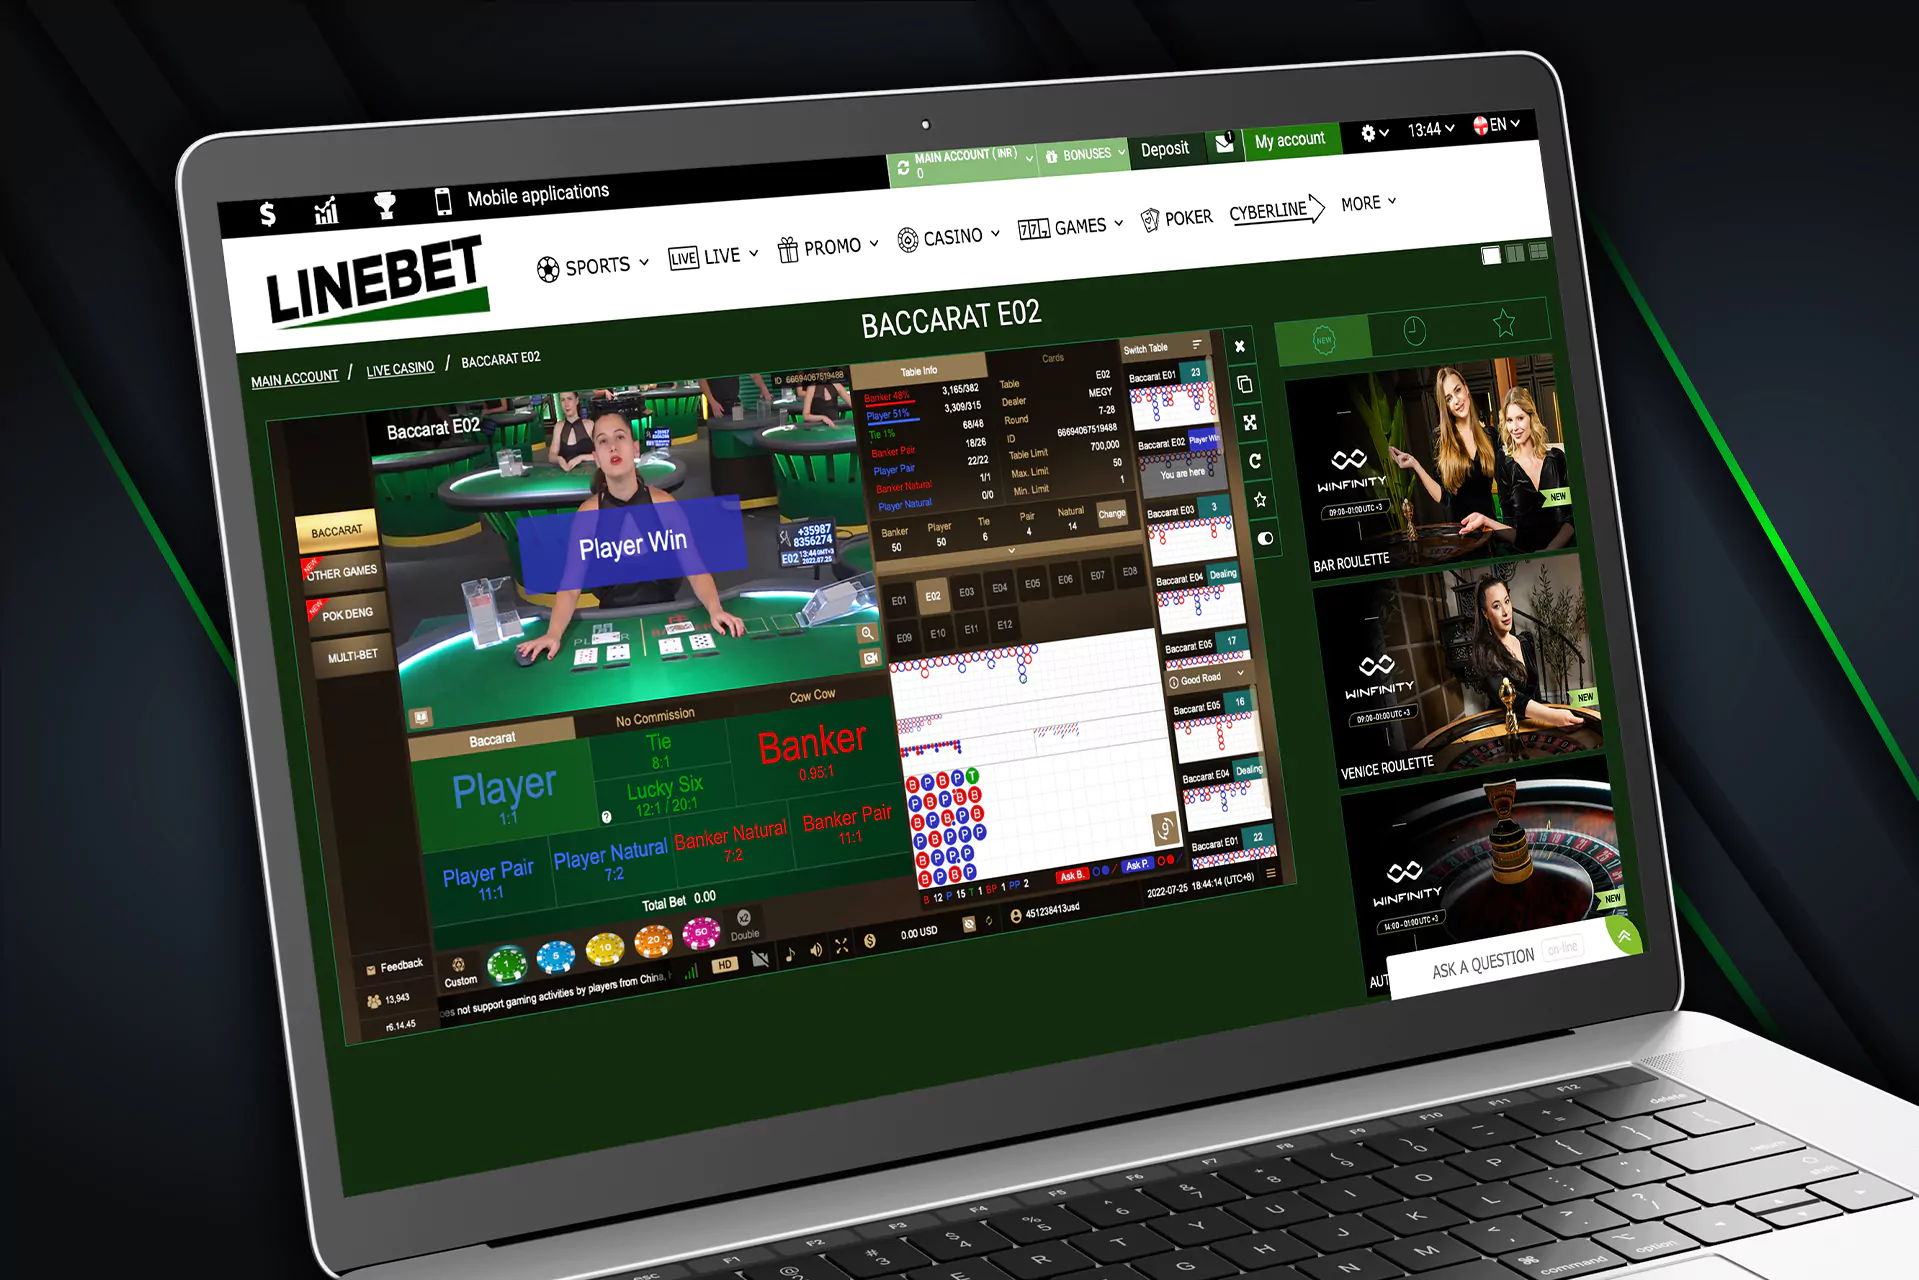 You can also play baccarat at Linebet.